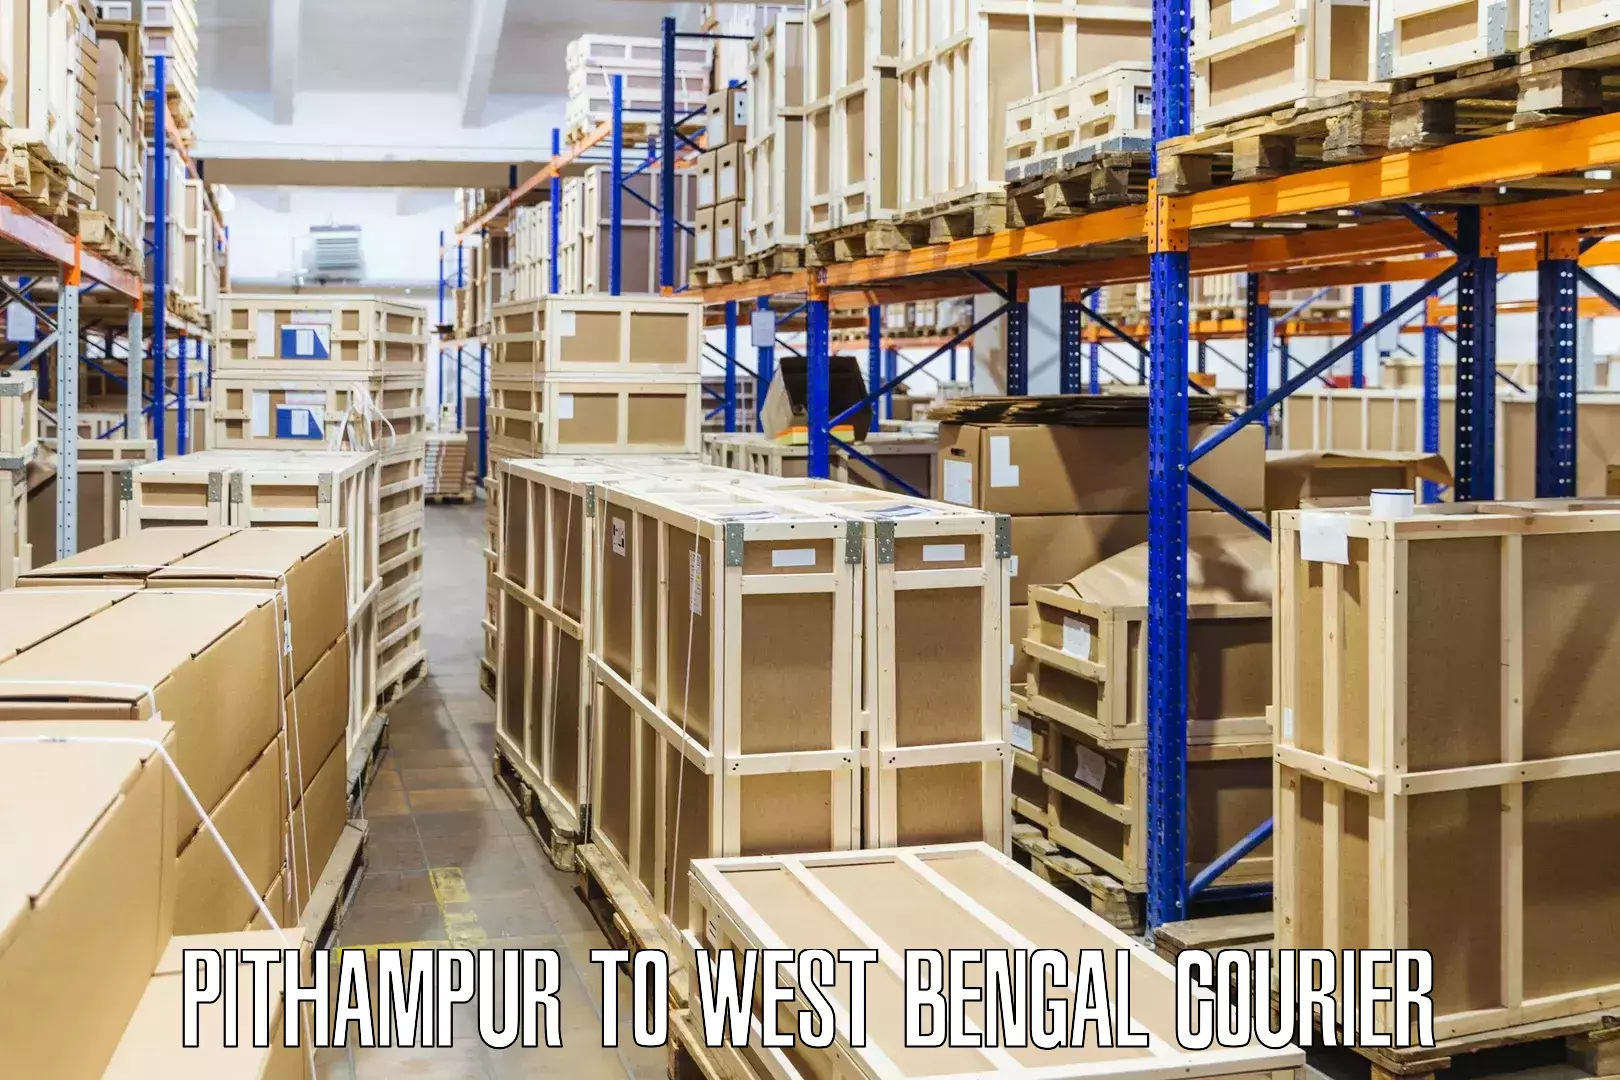 Global parcel delivery Pithampur to Durgapur